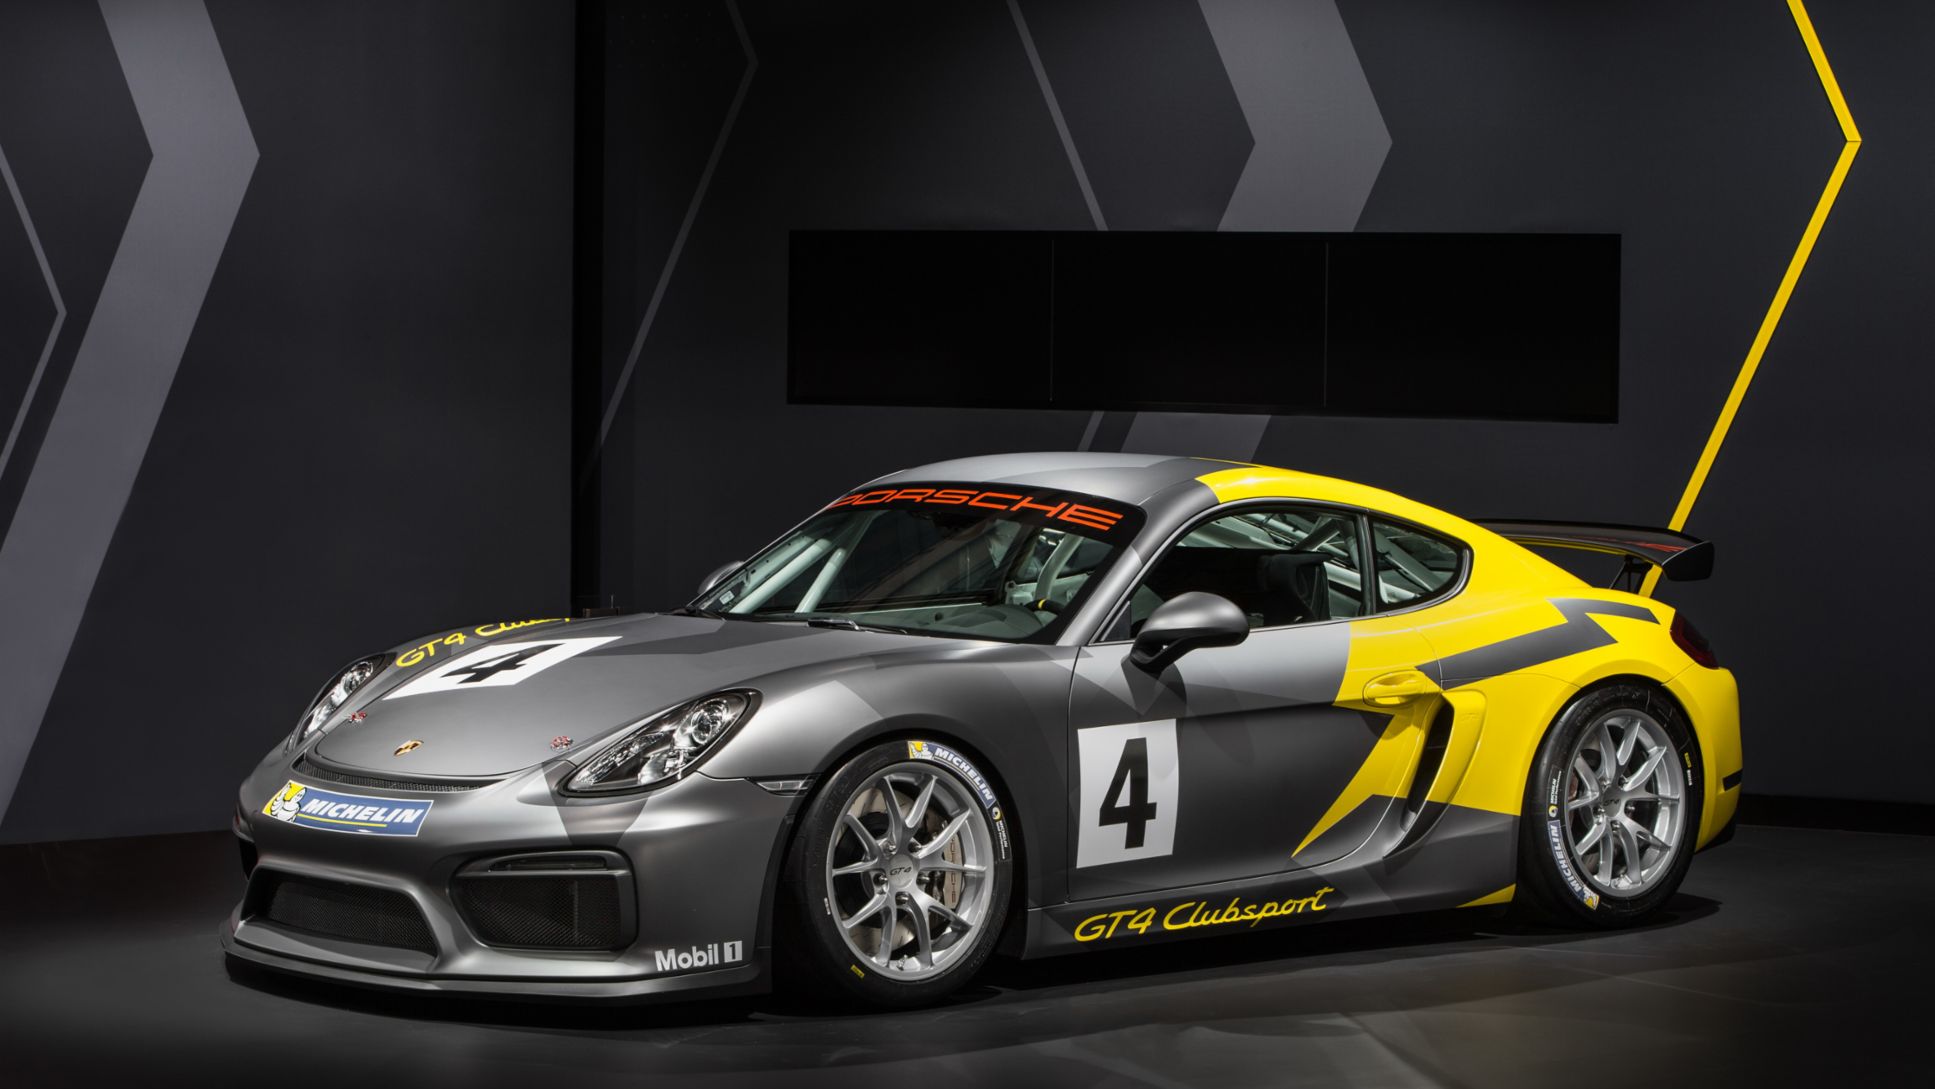 World premiere in Los Angeles: New Porsche Cayman GT4 Clubsport for the racetrack